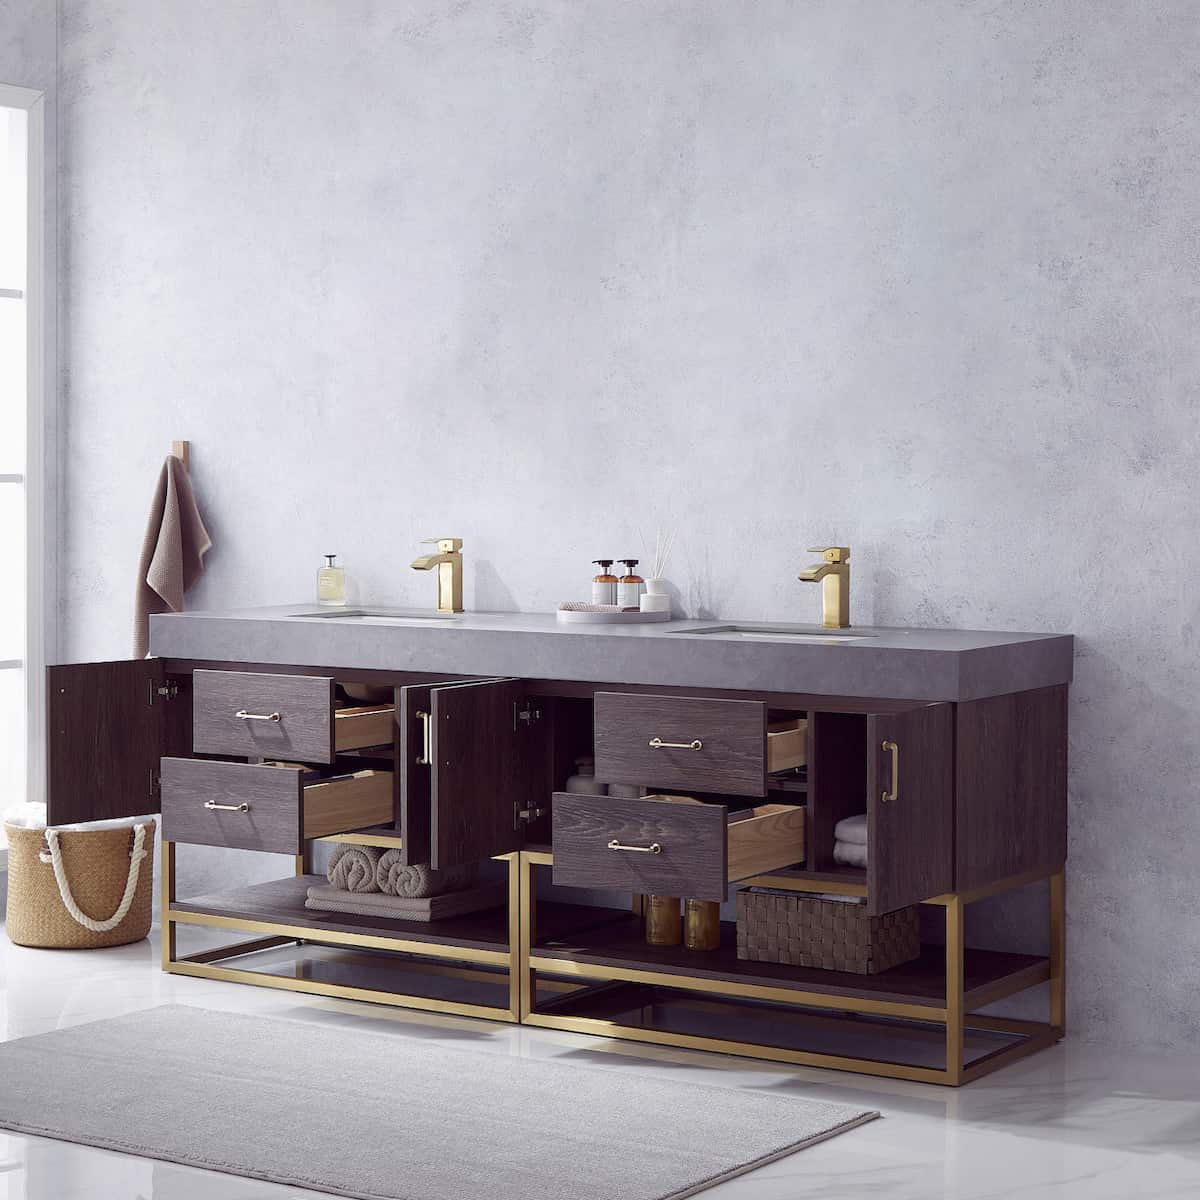 Vinnova Alistair 84 Inch Freestanding Double Sink Bath Vanity in North Carolina Oak and Brushed Gold Frame with Grey Sintered Stone Top Without Mirrors Inside 789084-NC-WK-NM